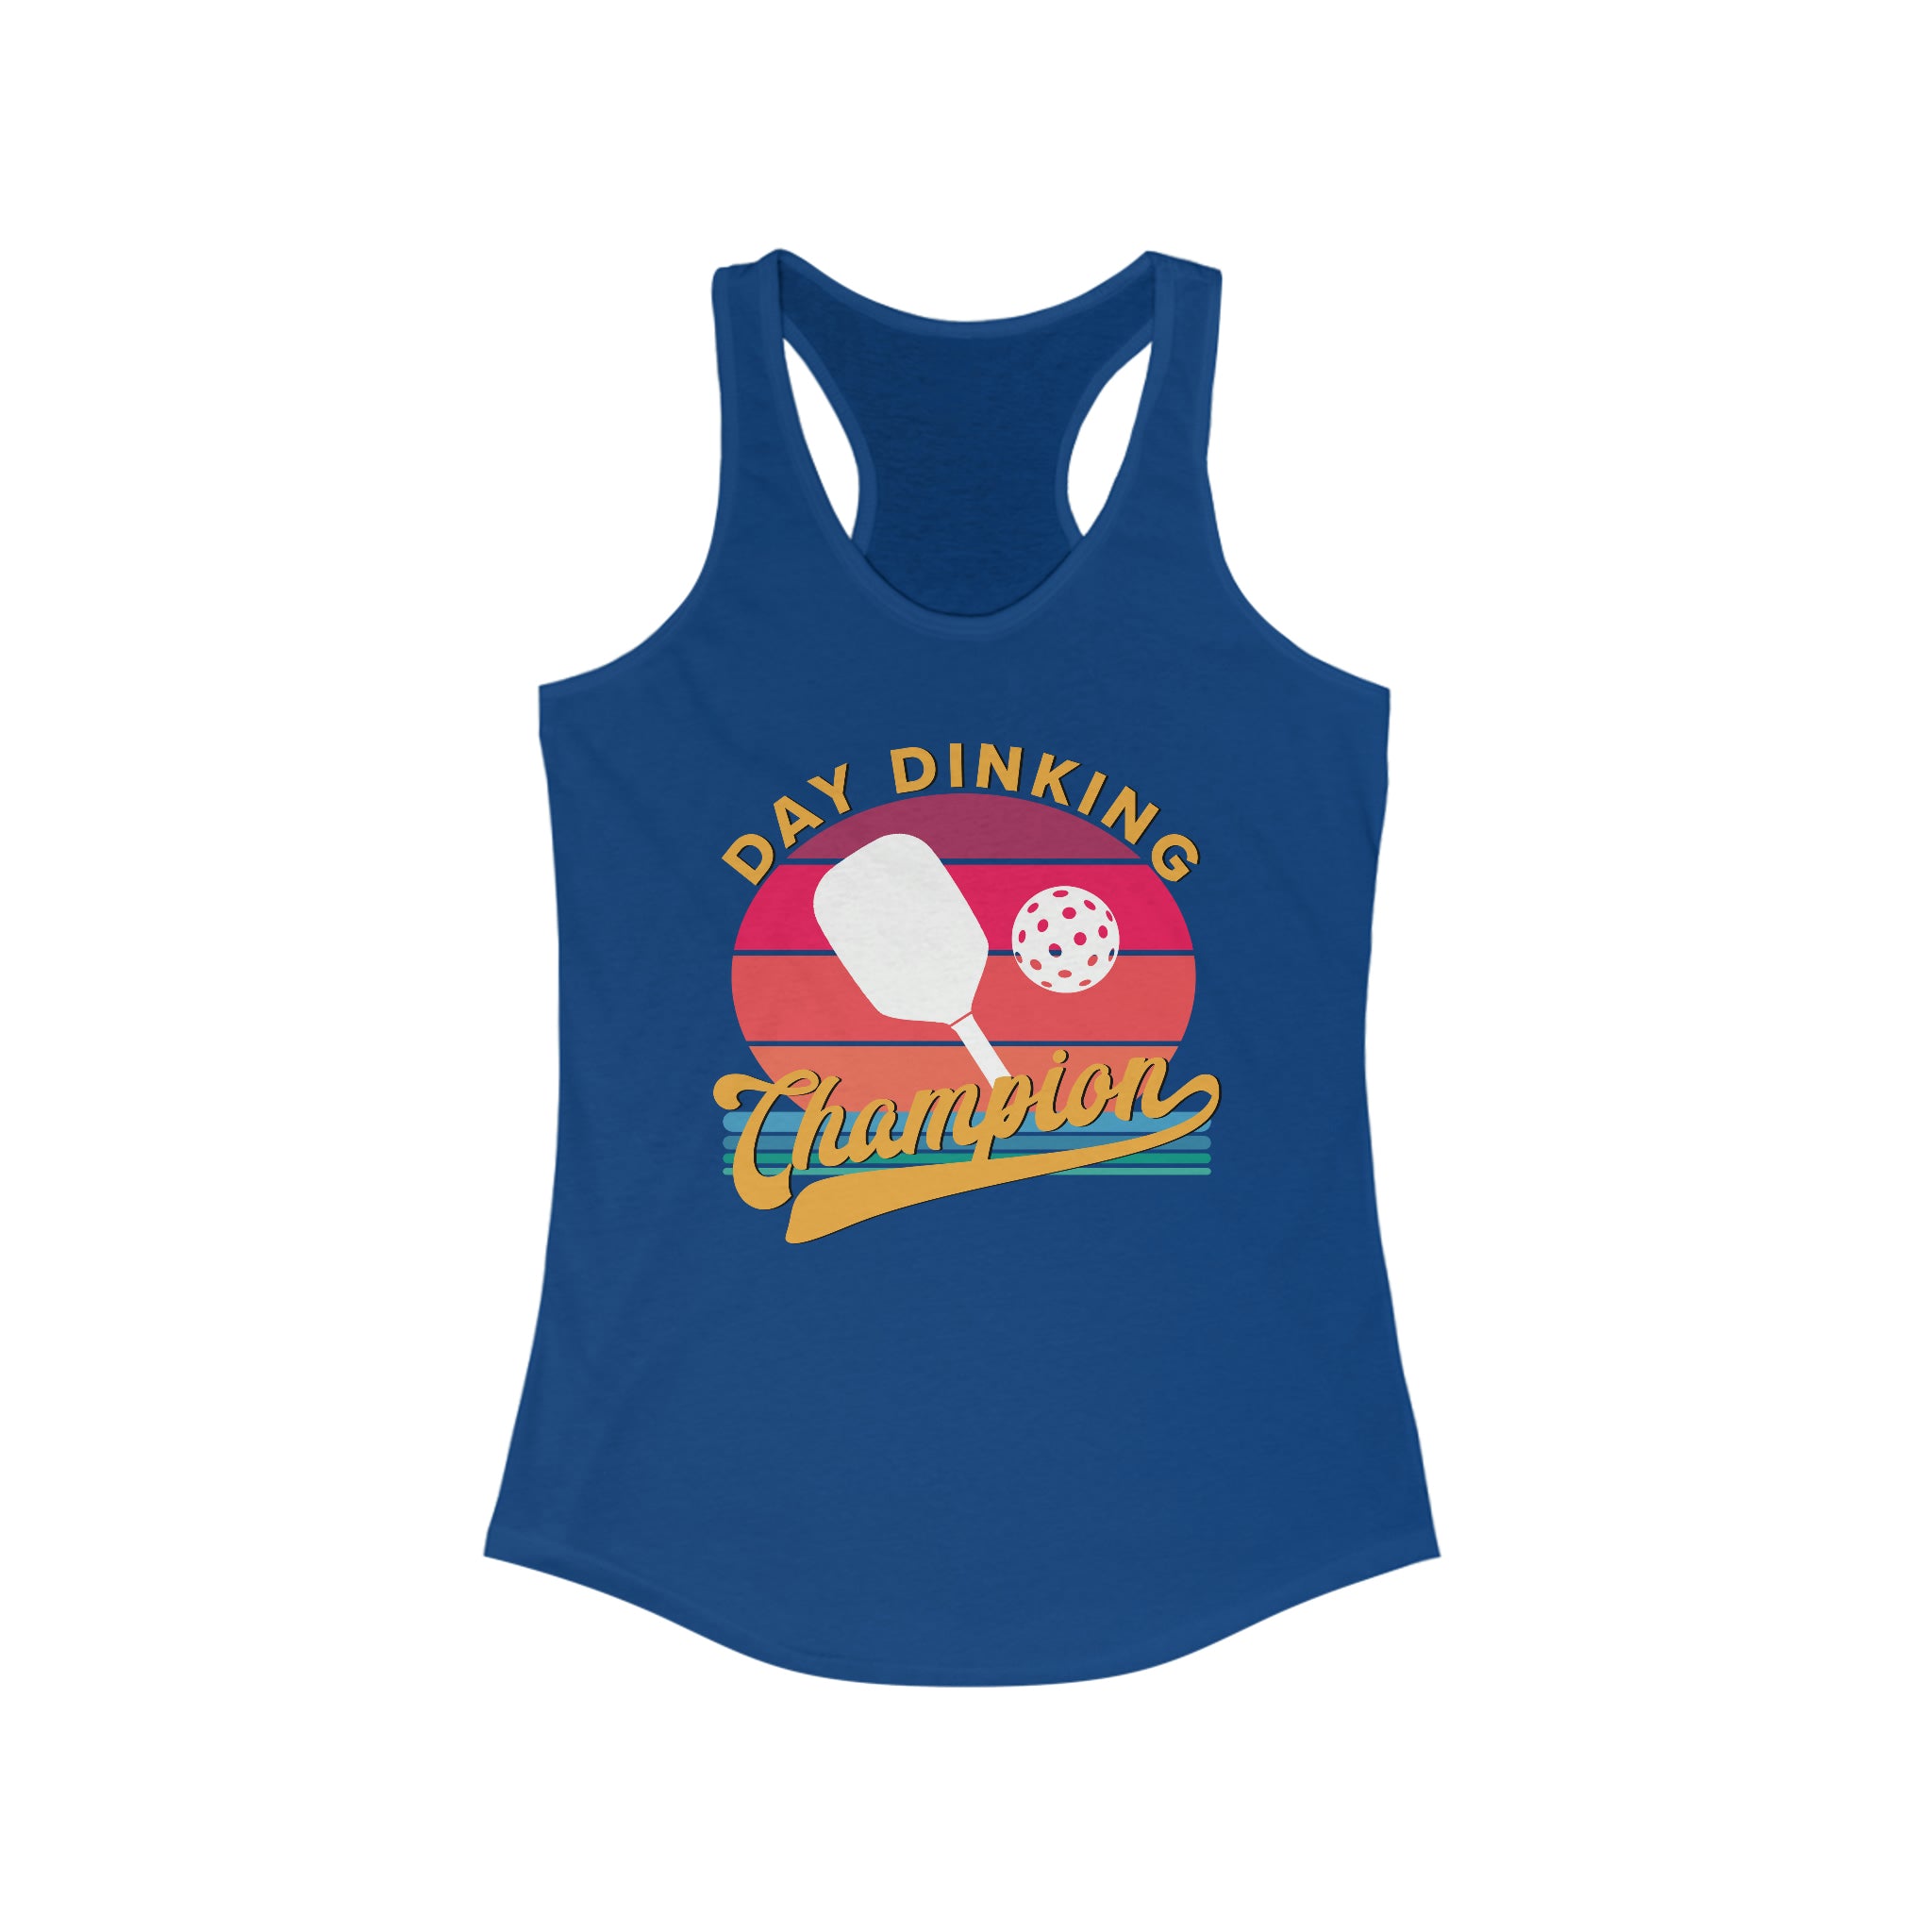 royal blue day dinking champion retro inspired pickleball apparel women's racerback tank top front view